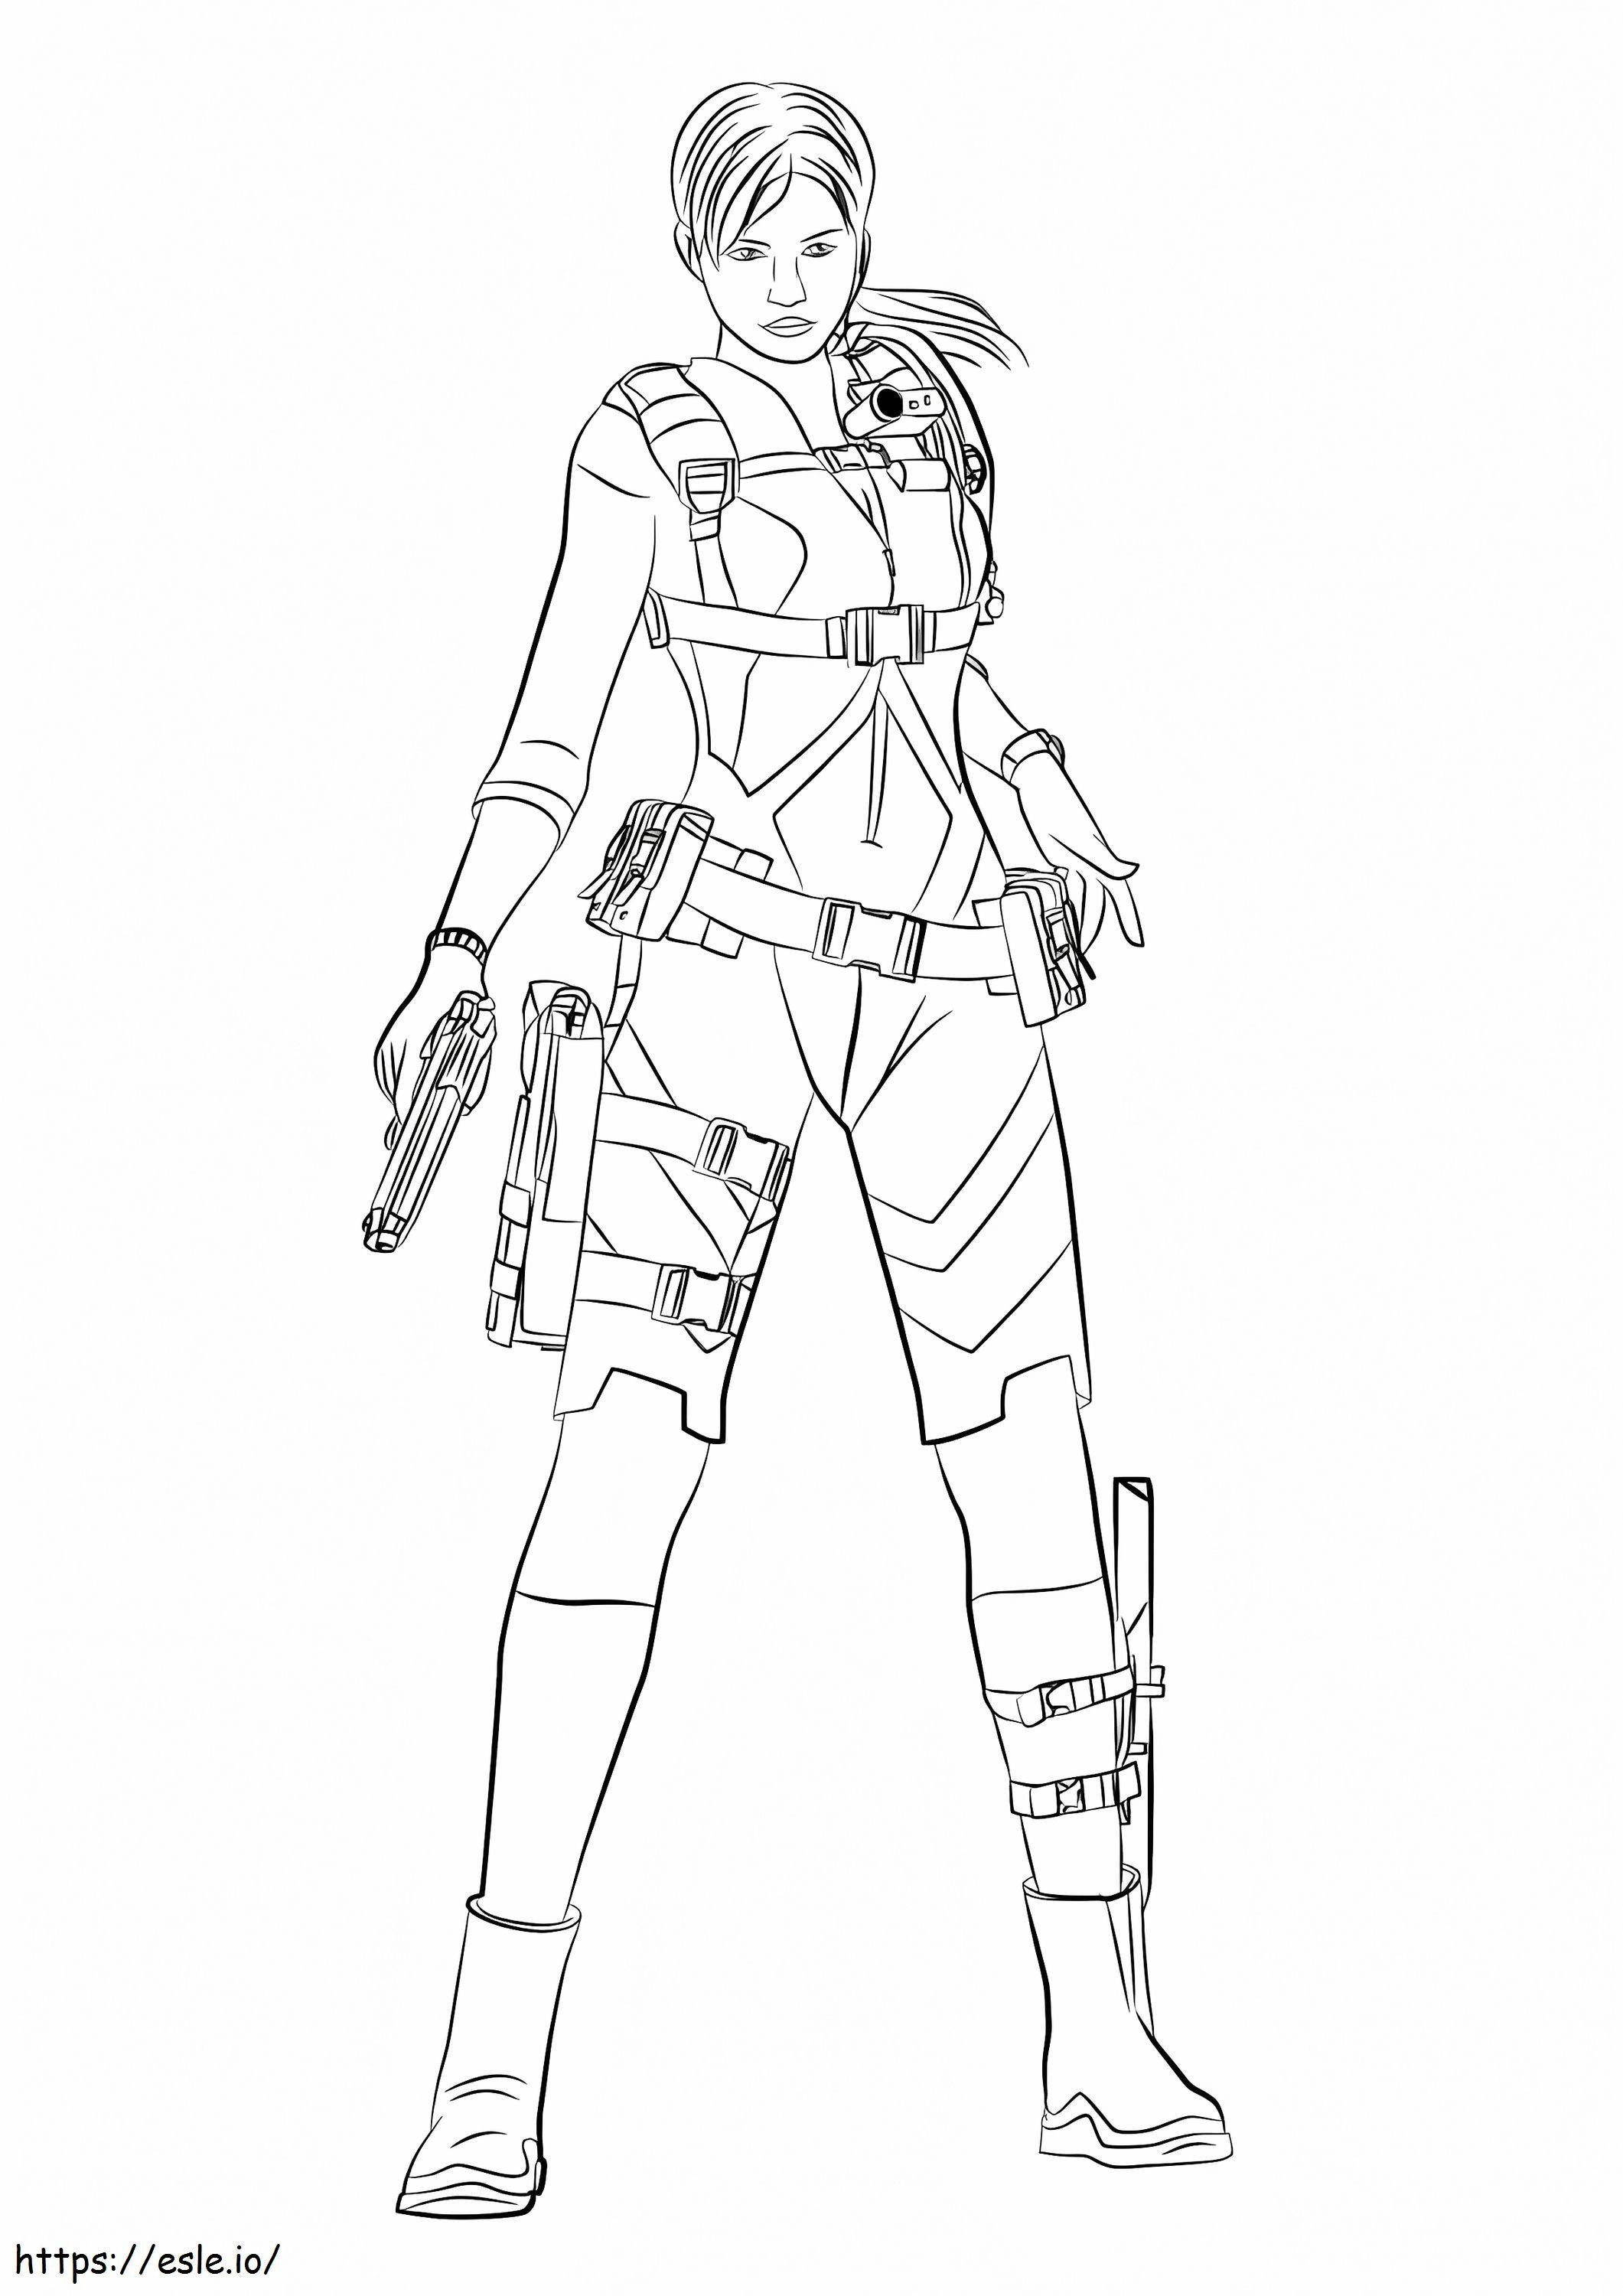 Jill Valentine From Resident Evil coloring page